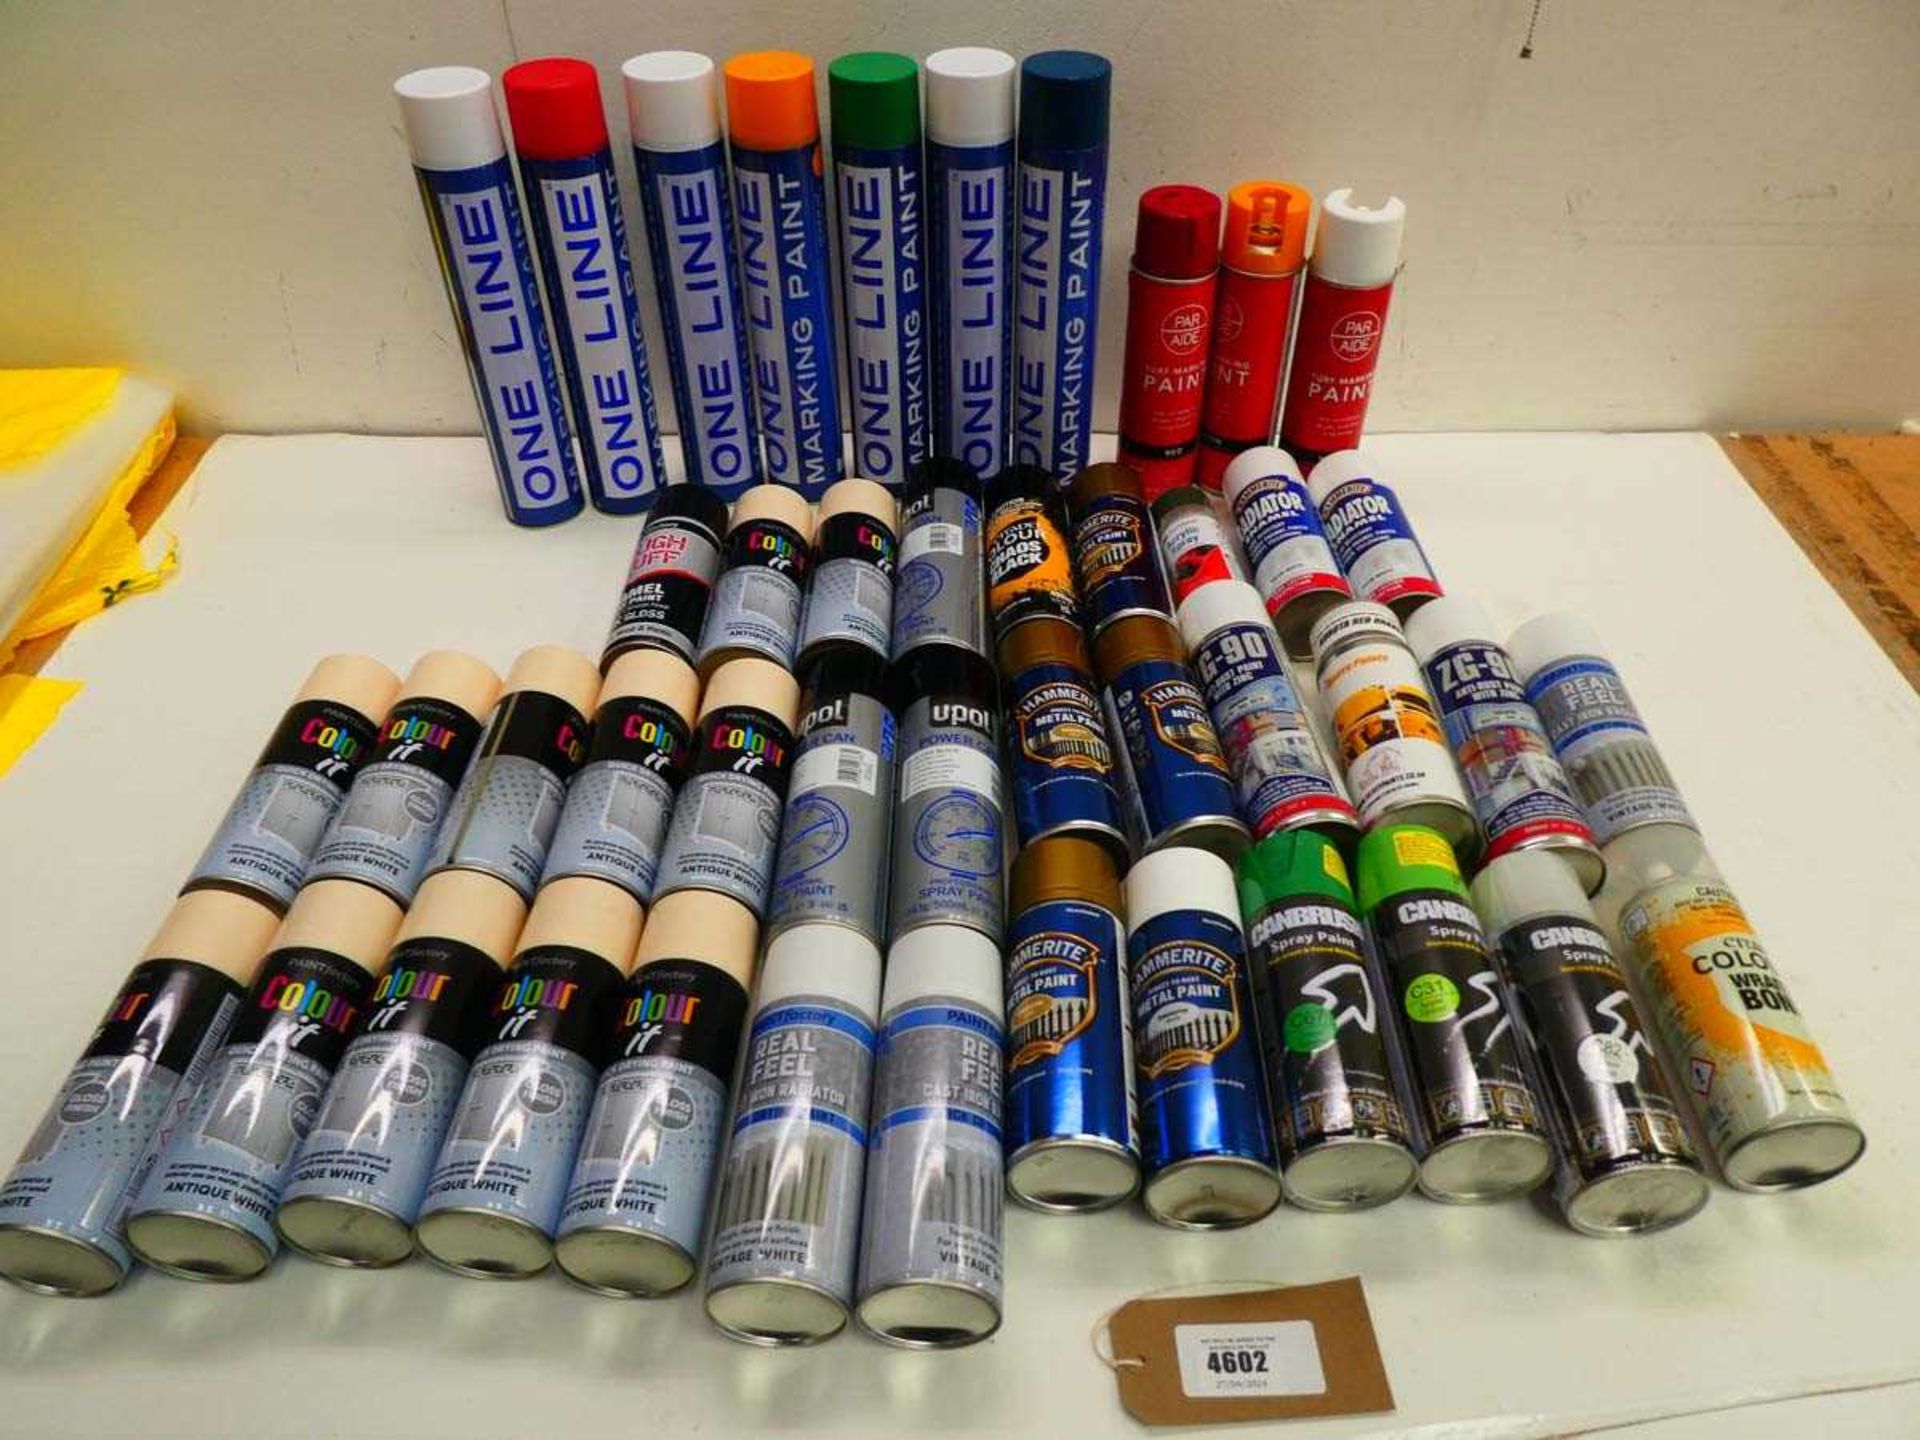 +VAT Large selection of spray paints to include marking paint, furniture paint, metal paint,